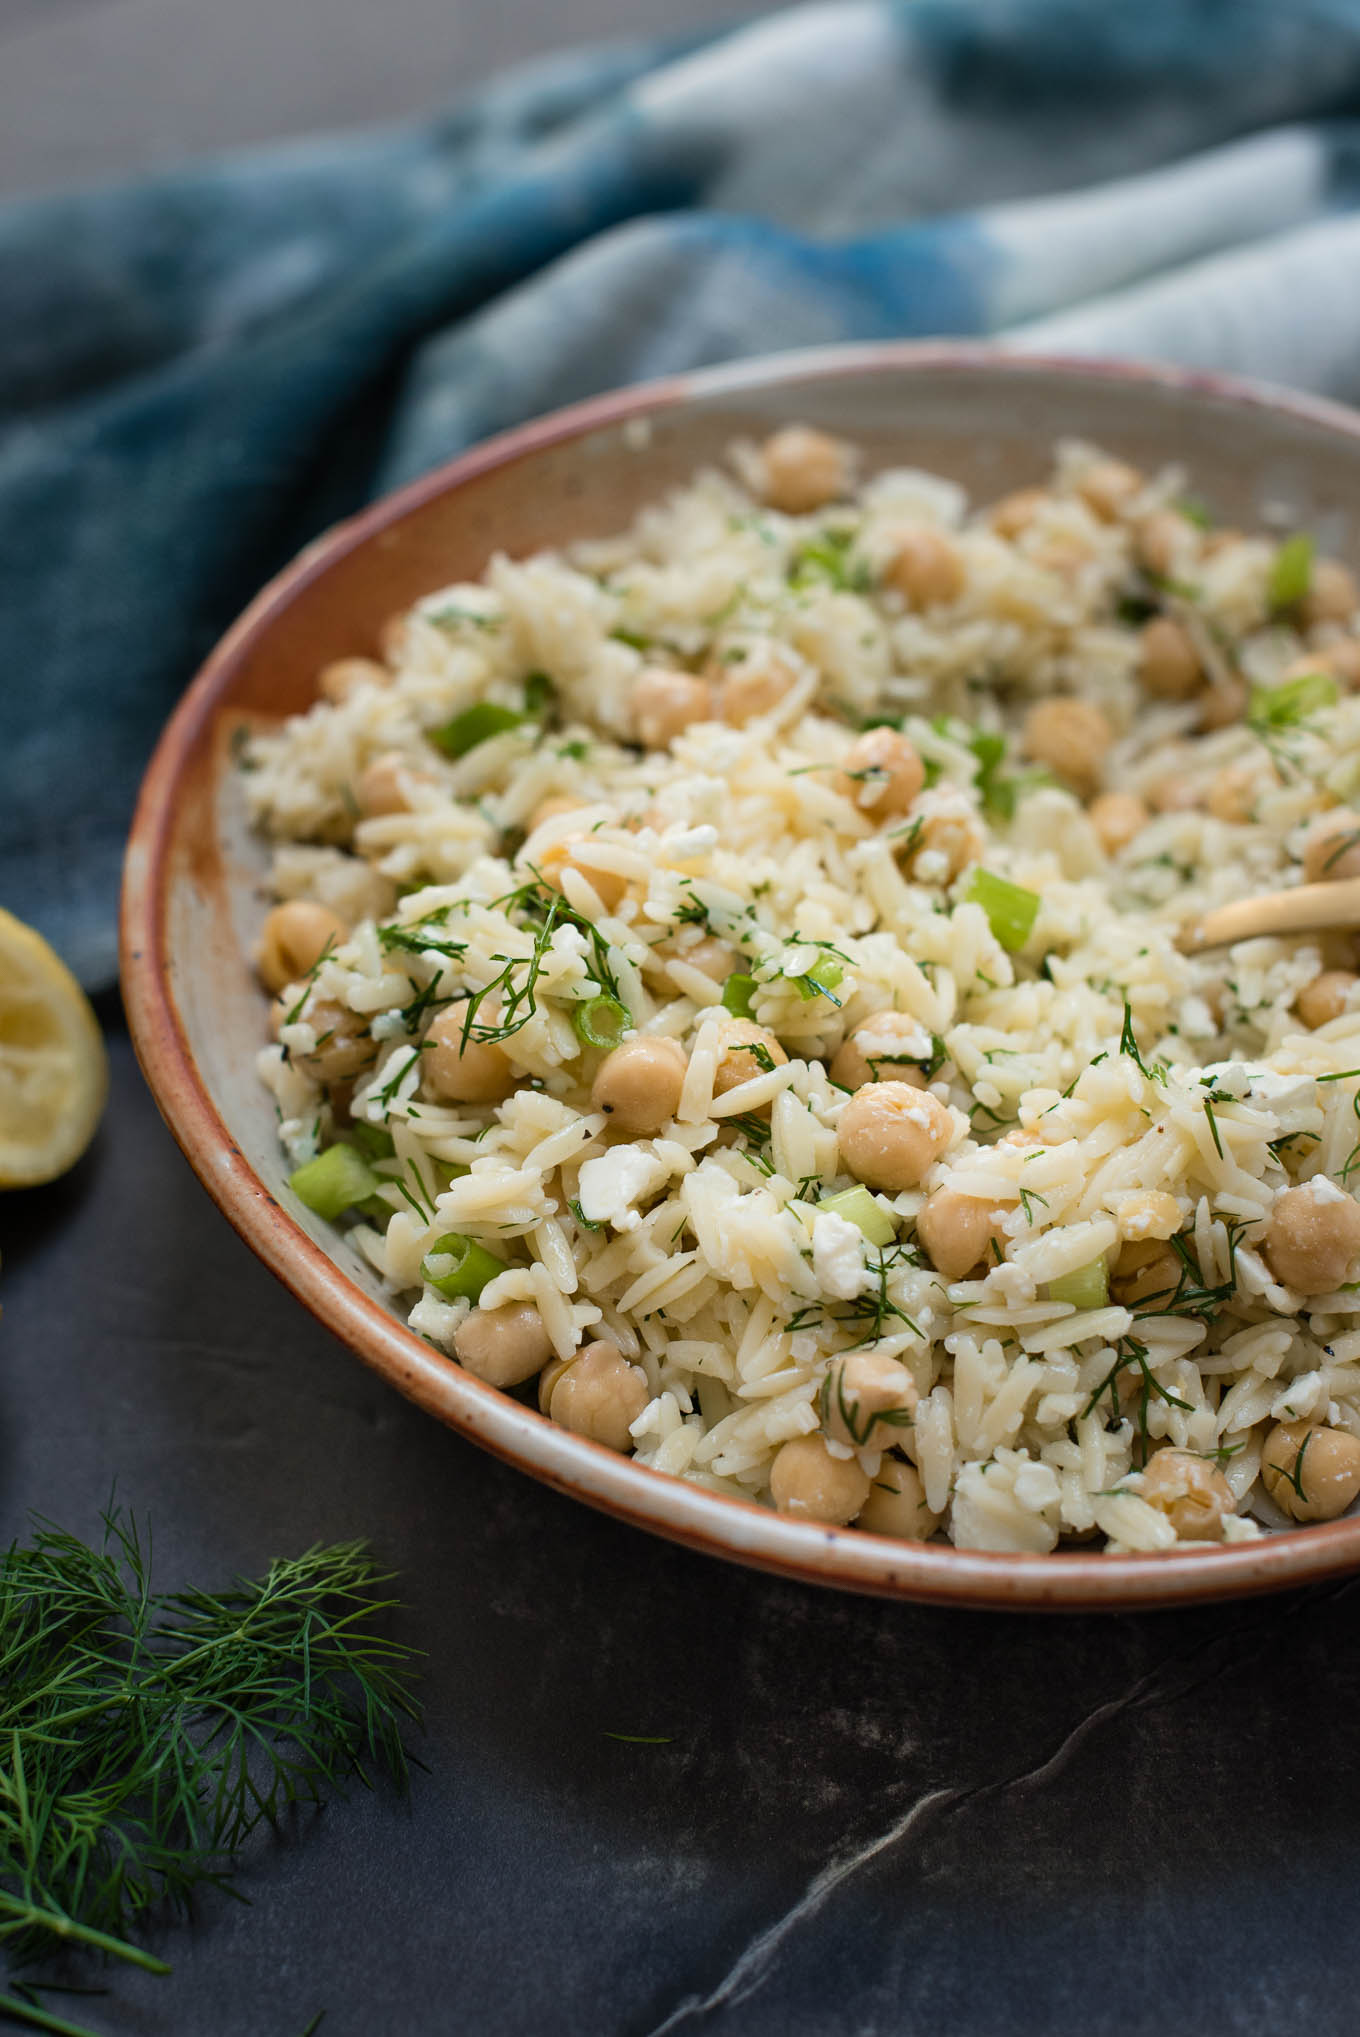 Orzo Chickpea Pasta Salad is a great summer side filled with feta, dill and lots of lemon.